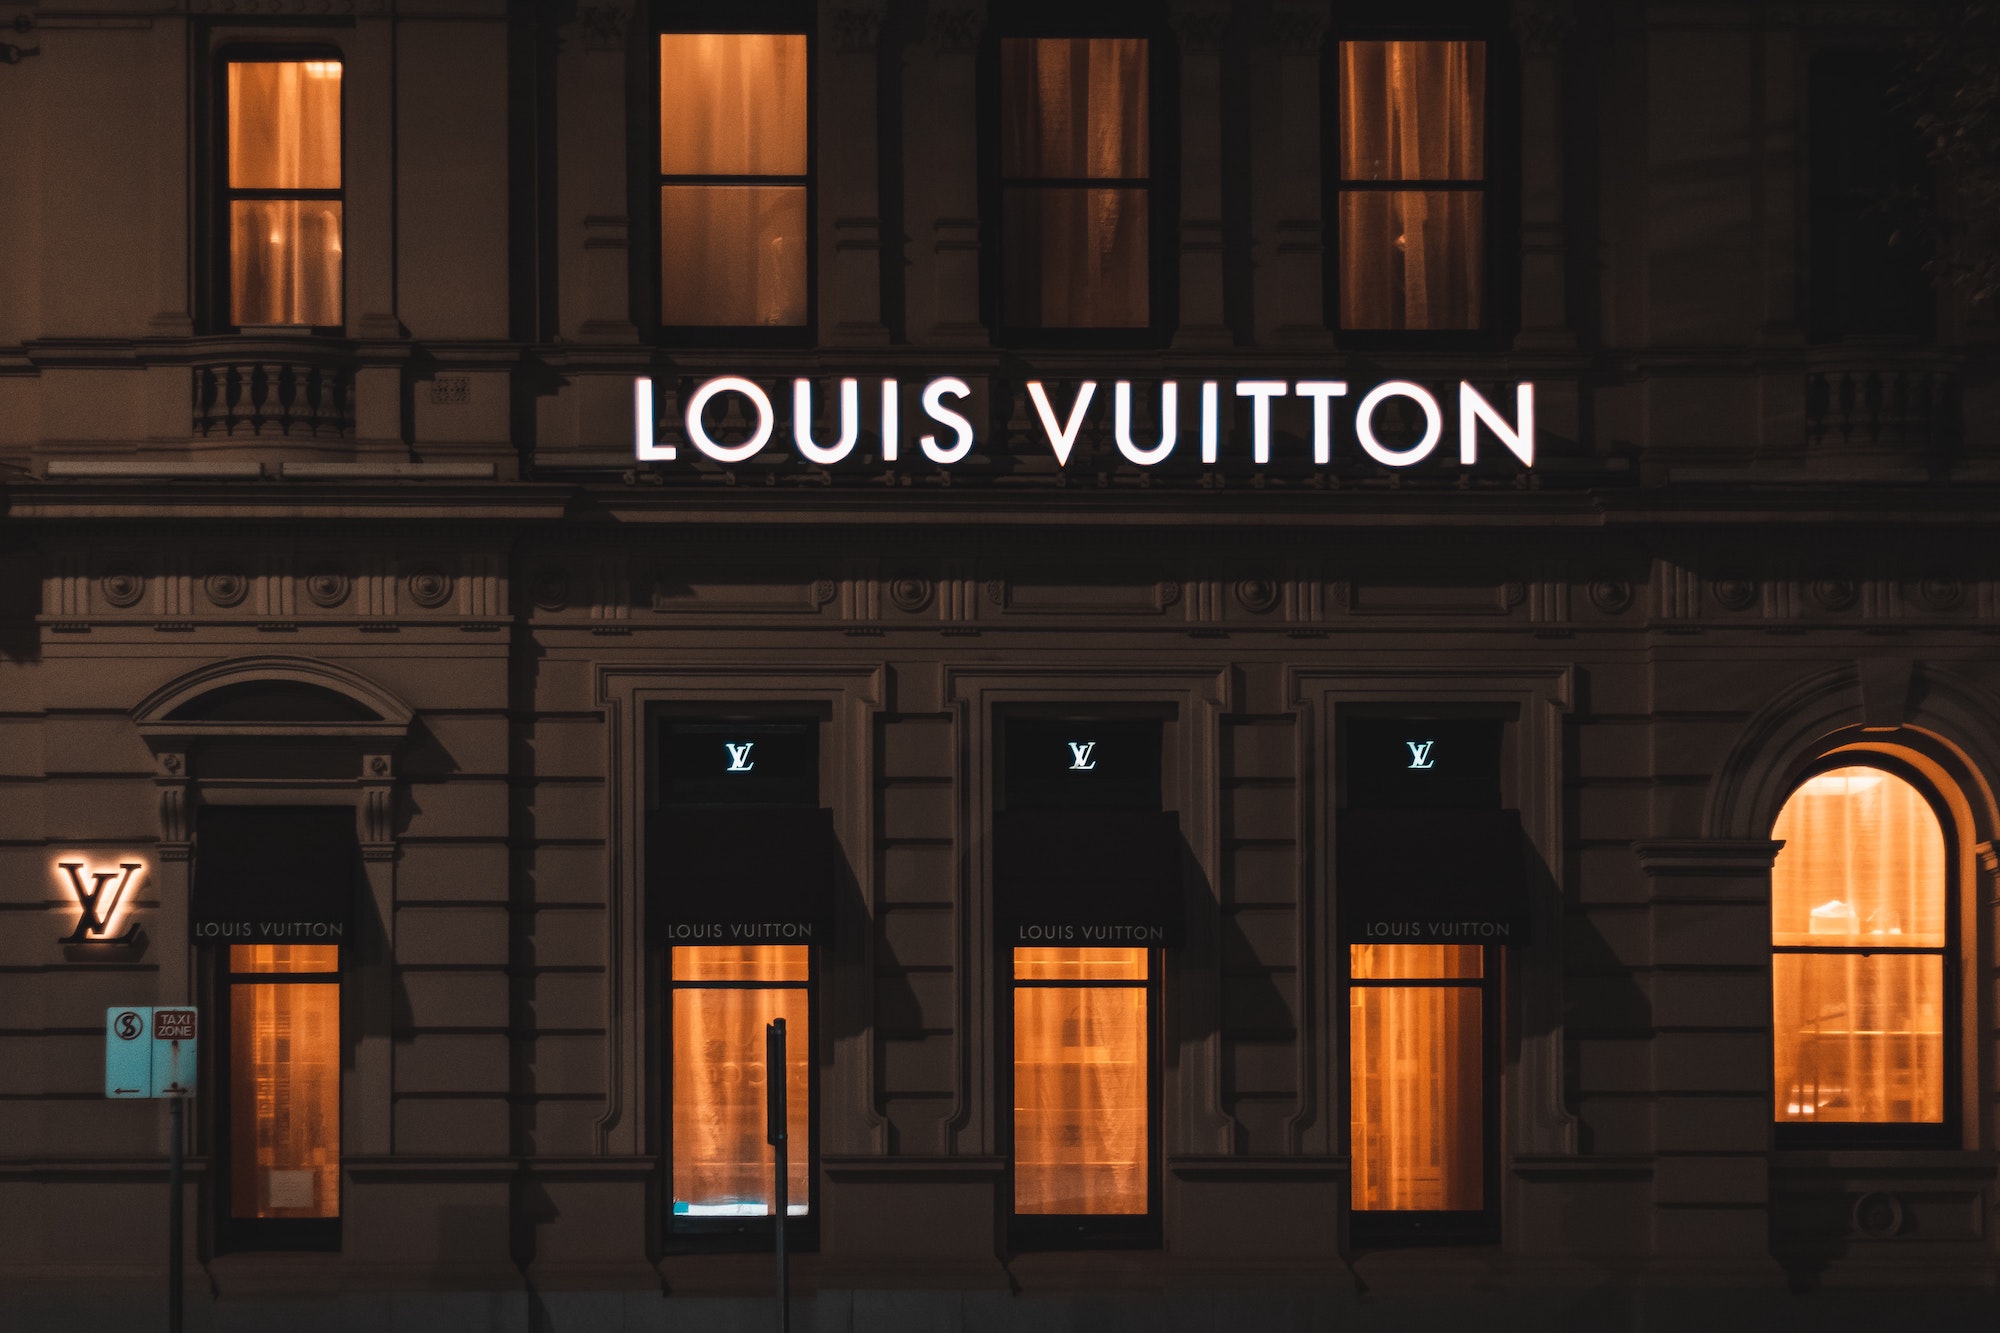 Premier Jewellery and Loans - Louis Vuitton, whose name would